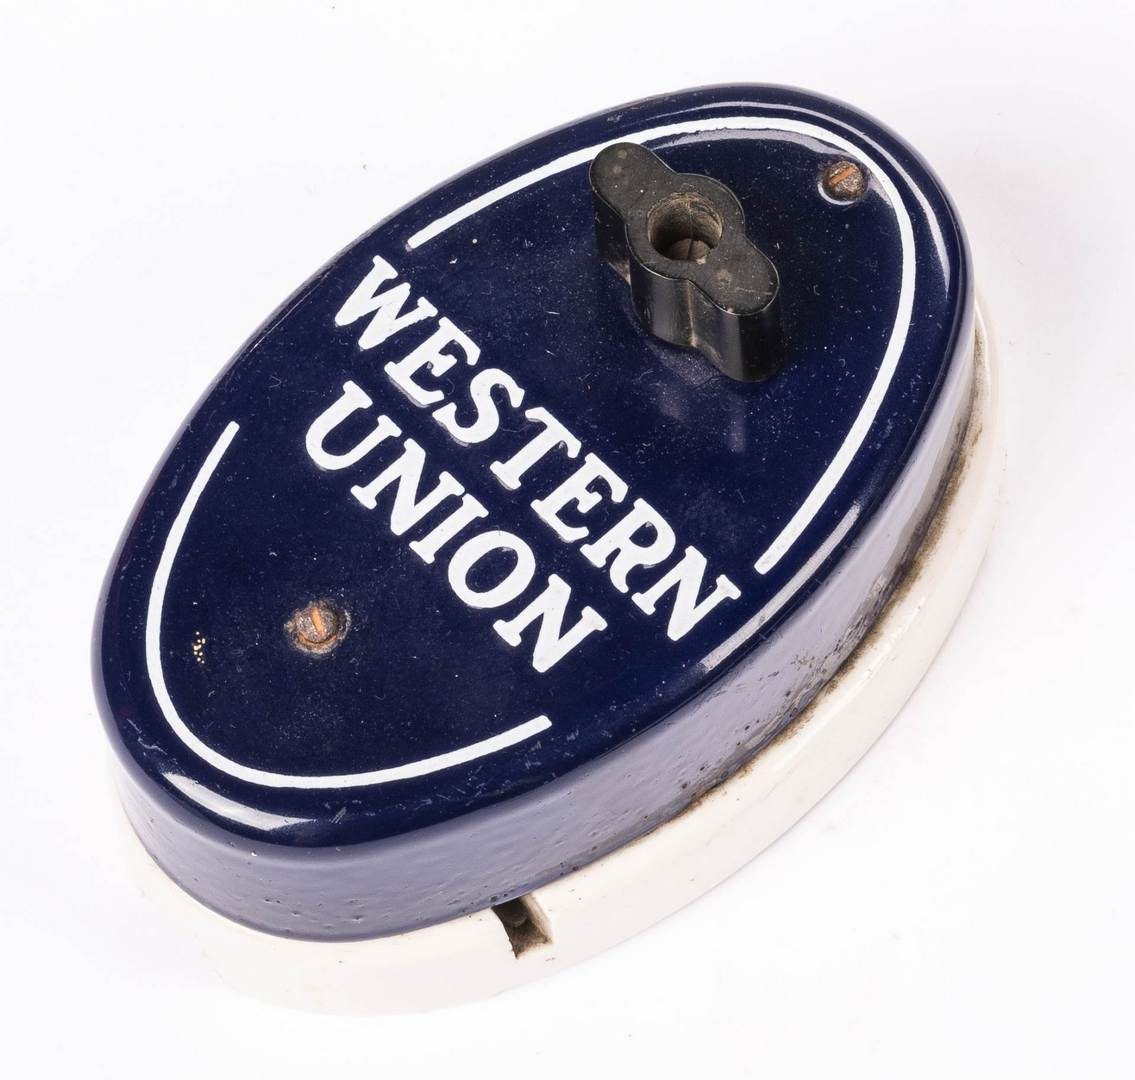 Lot 416: Western Union Telegraph Call Box w/ Sign and Assorted Papers & Books, inc. "Teletype"